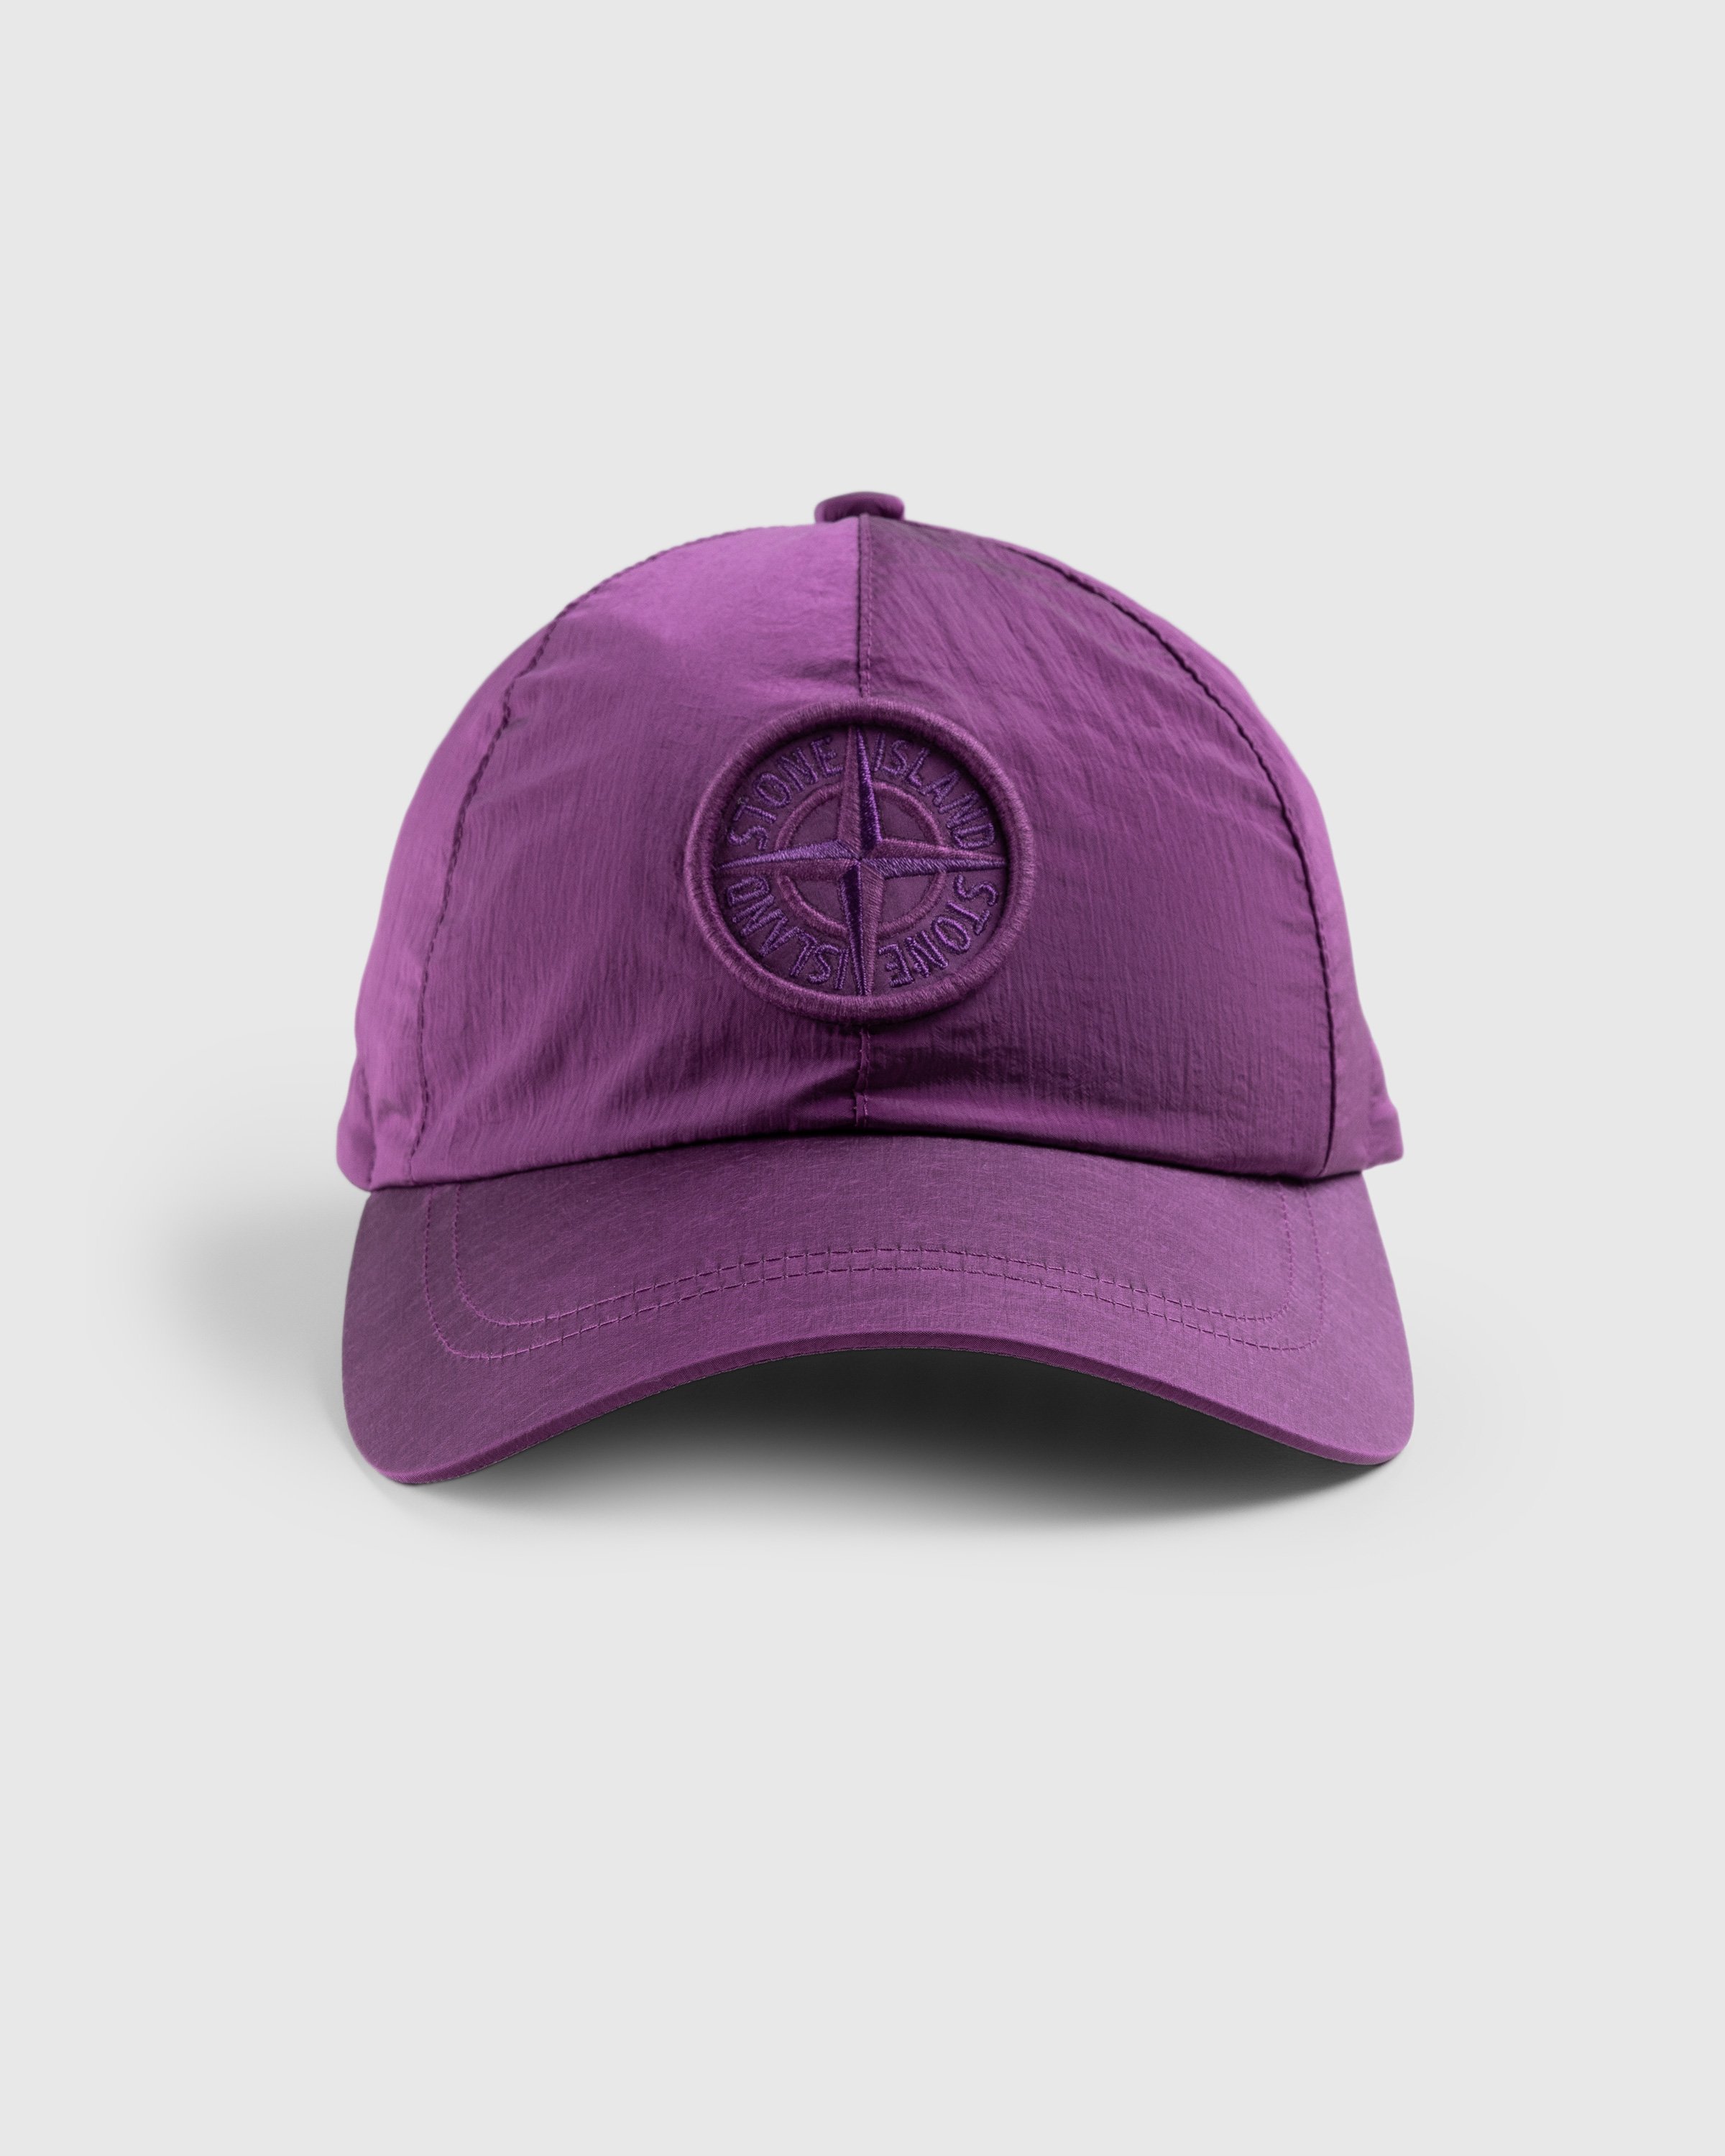 Stone Island - Cappello Pink 781599576 - Accessories - Pink - Image 2